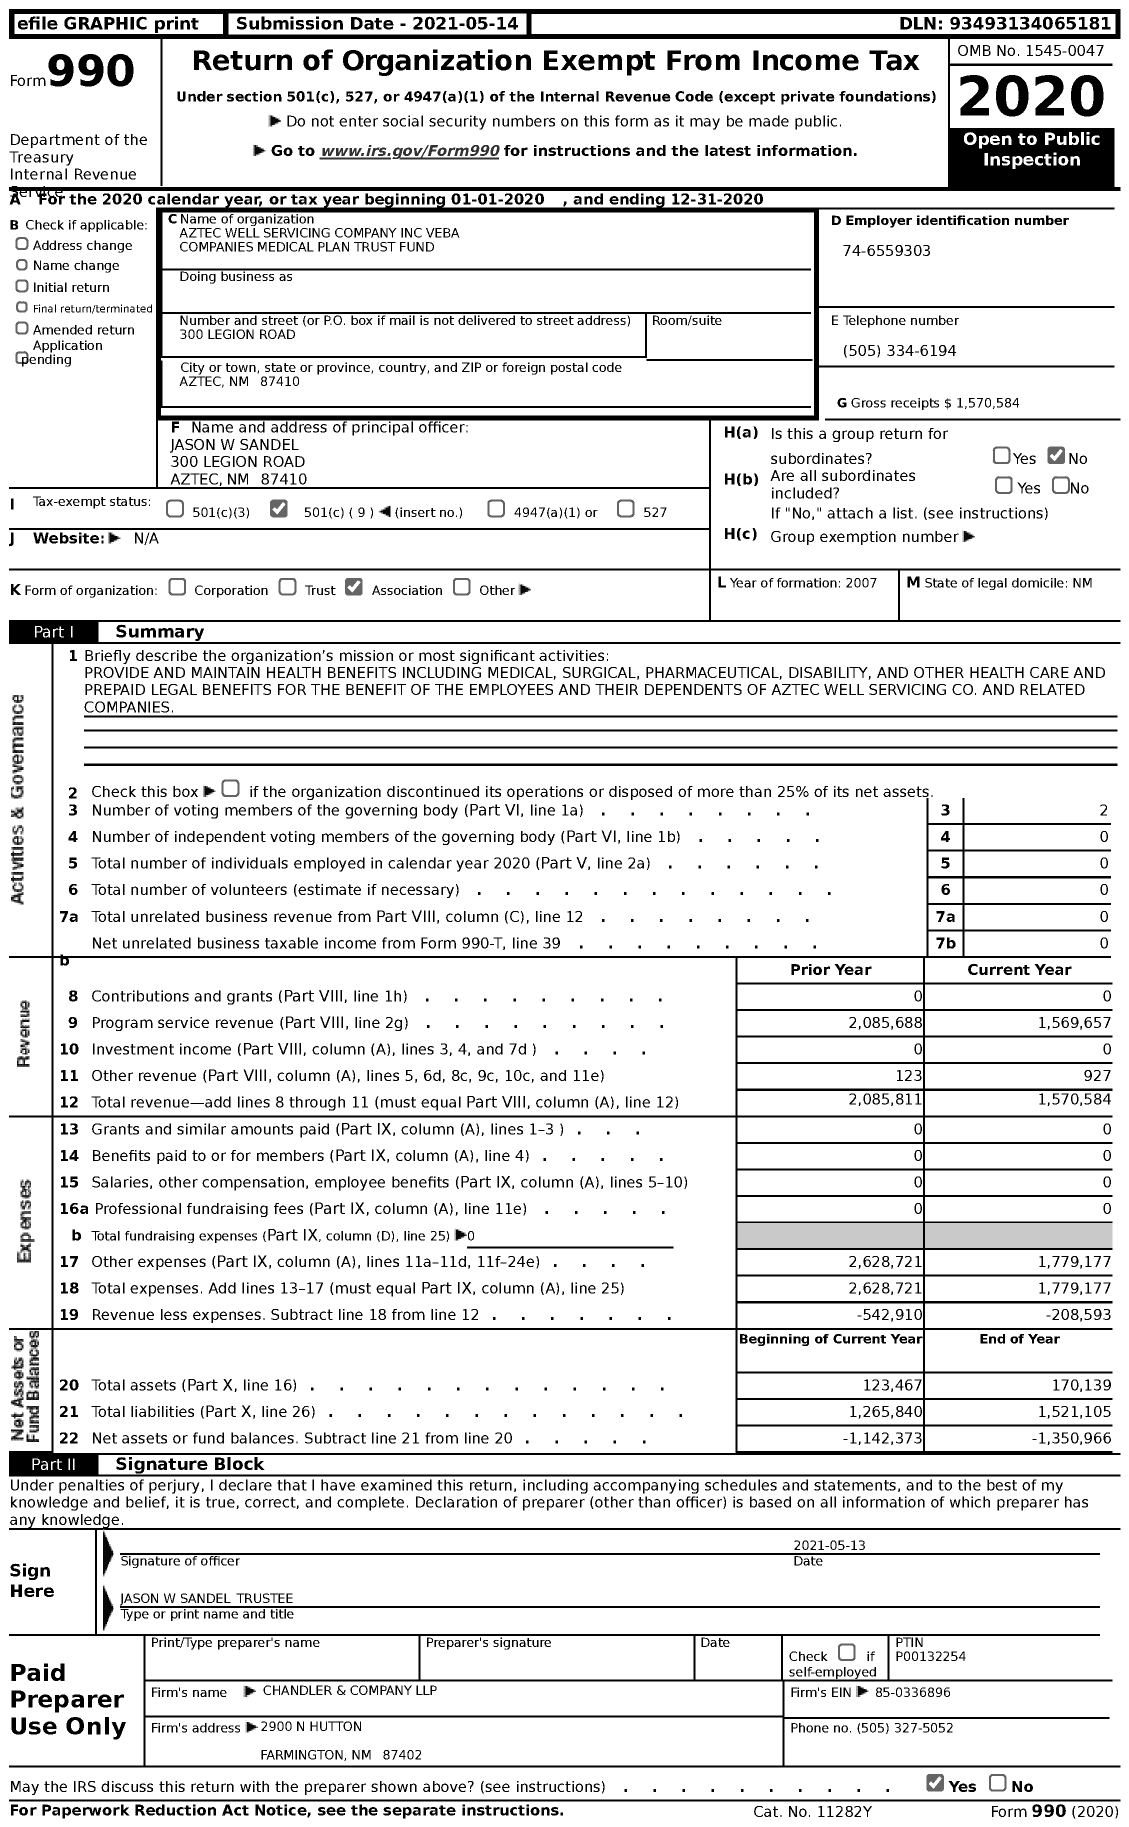 Image of first page of 2020 Form 990 for Aztec Well Servicing Company Veba Companies Medical Plan Trust Fund